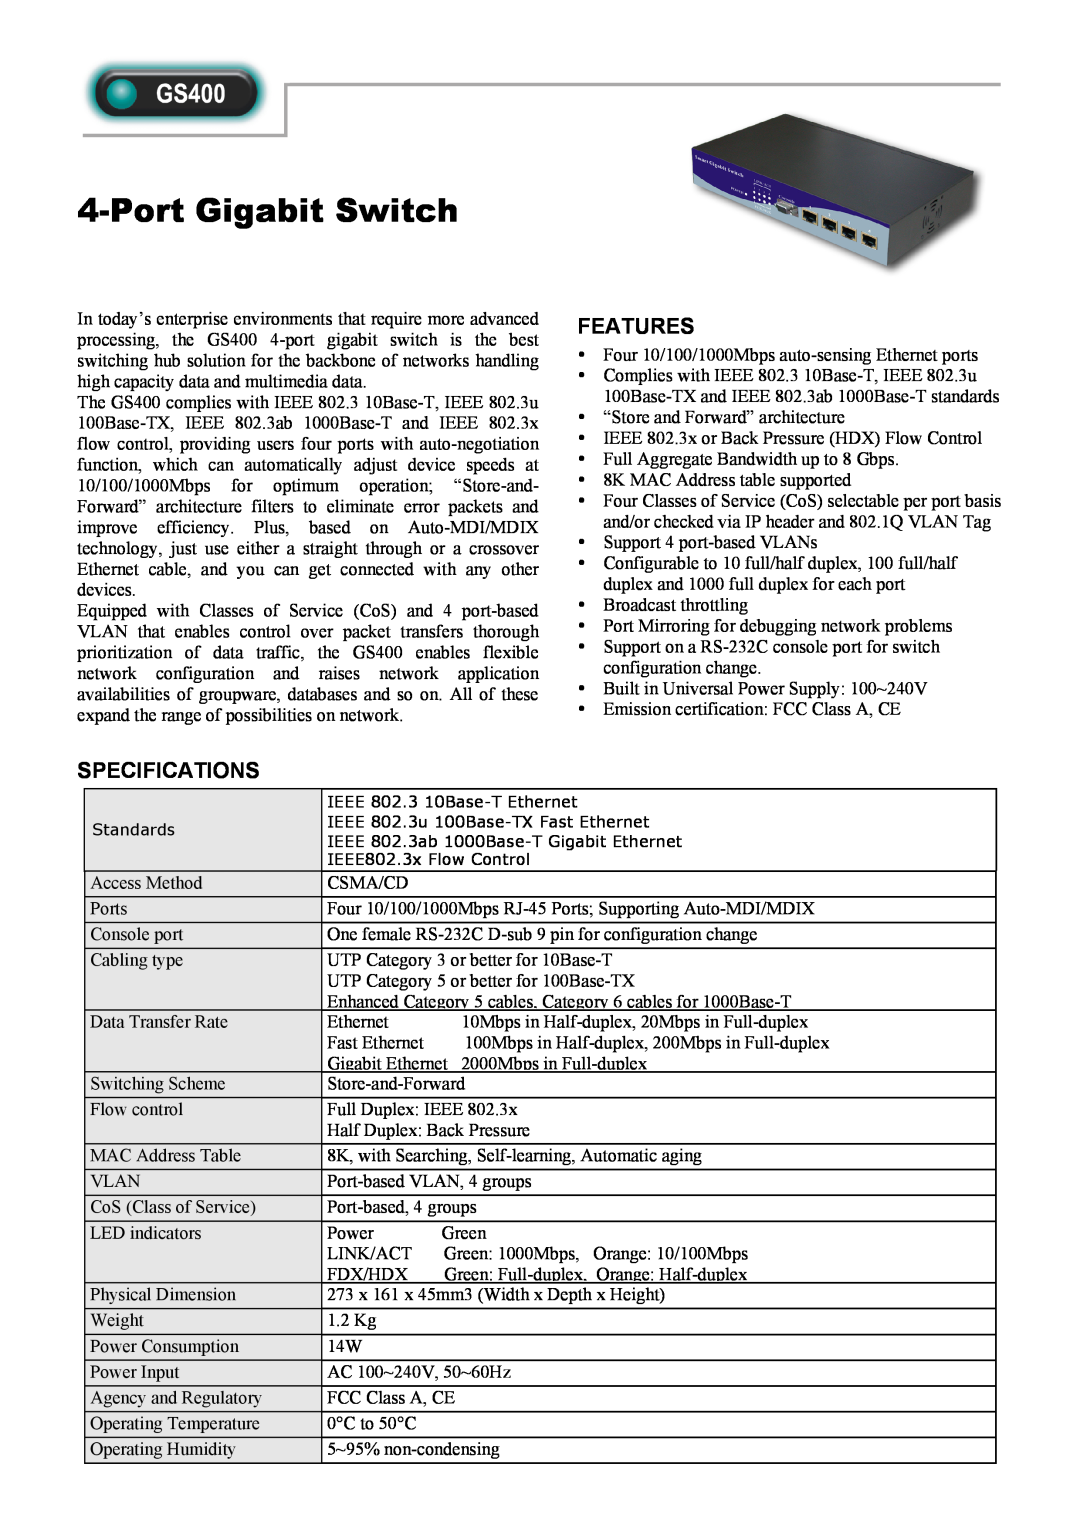 Abocom GS400 manual Port Gigabit Switch, Features, Specifications 